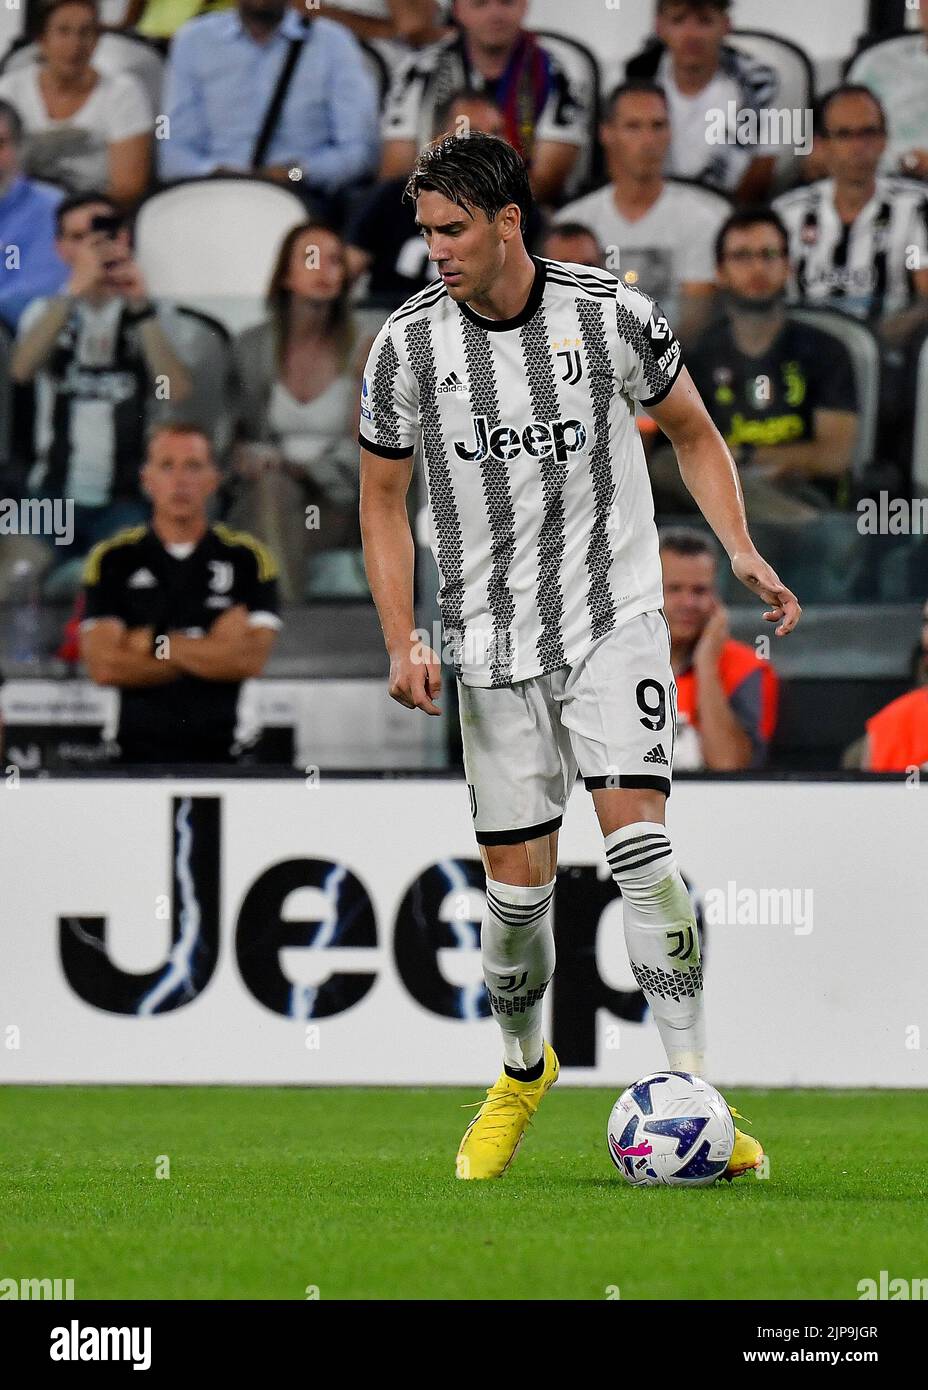 Turin, Italy, August 15, 2022, Dusan Vlahovic of Juventus FC in action  during the Serie A